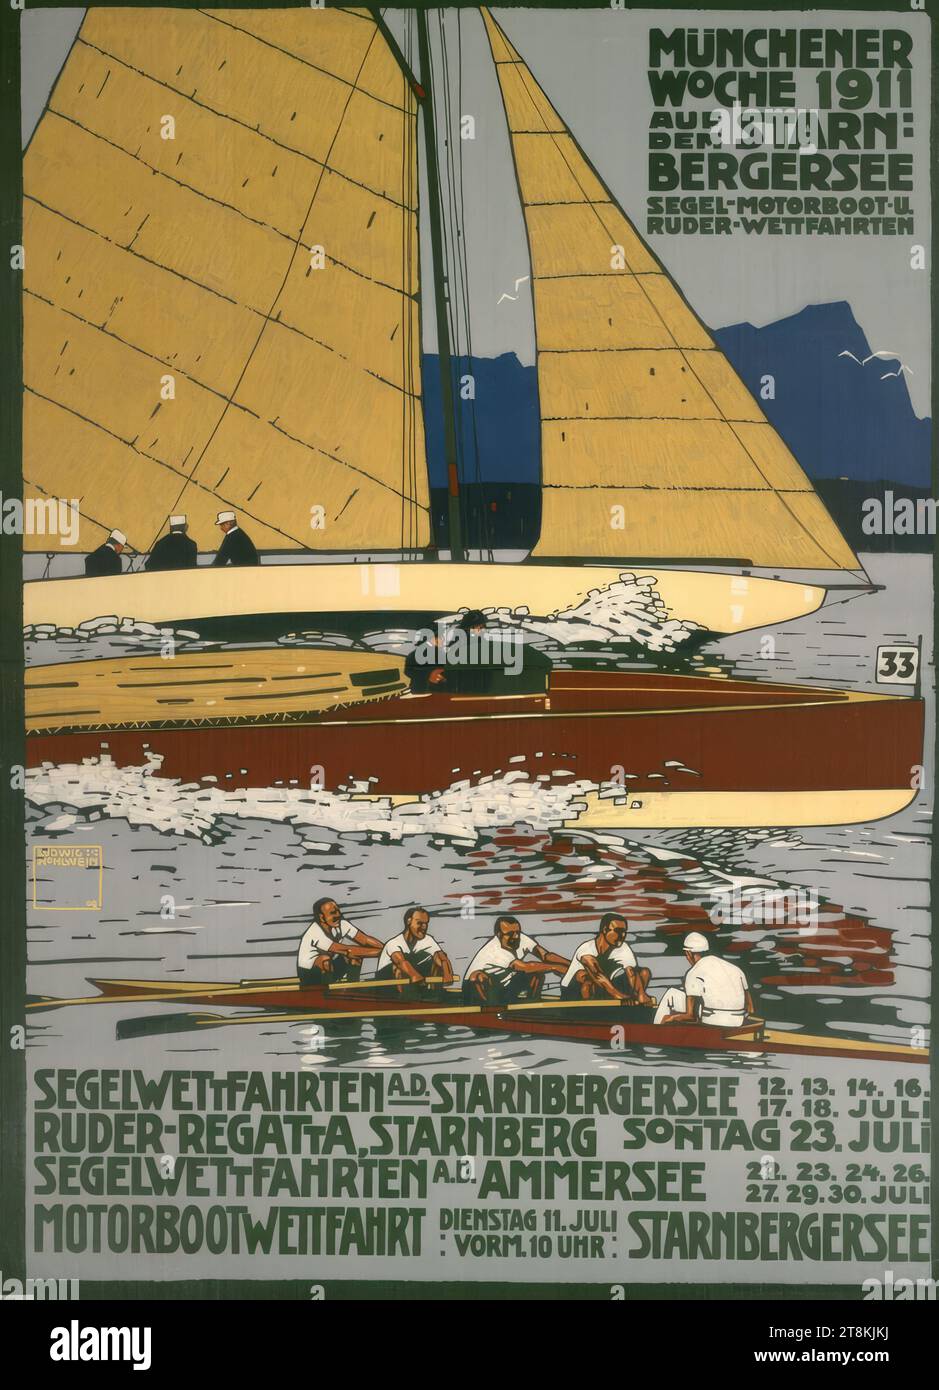 MUNICH WEEK 1911 ON LAKE STARNBERGER; SAILING, MOTORBOAT AND ROWING COMPETITIONS, Ludwig Hohlwein, Wiesbaden 1874 - 1949 Berchtesgaden, 1909, print, color lithograph, sheet: 1250 mm x 920 mm, right. 'United Printing & Art Institutions G.m.b.H., G. Schuh & Cie., Munich, Herrnstr. 35', in print Stock Photo